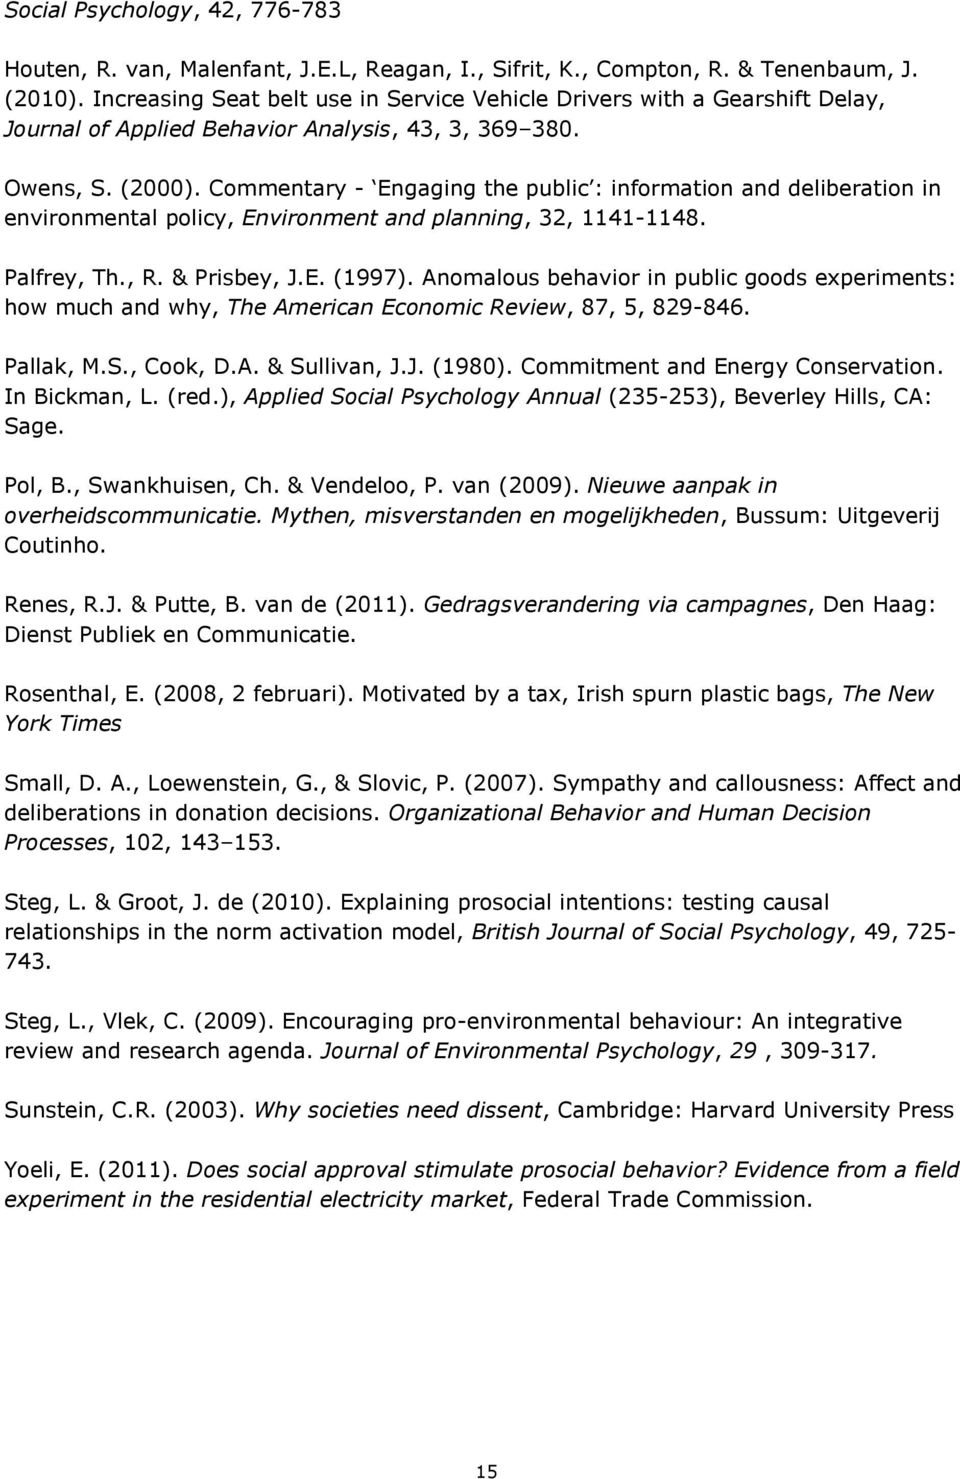 Commentary - Engaging the public : information and deliberation in environmental policy, Environment and planning, 32, 1141-1148. Palfrey, Th., R. & Prisbey, J.E. (1997).